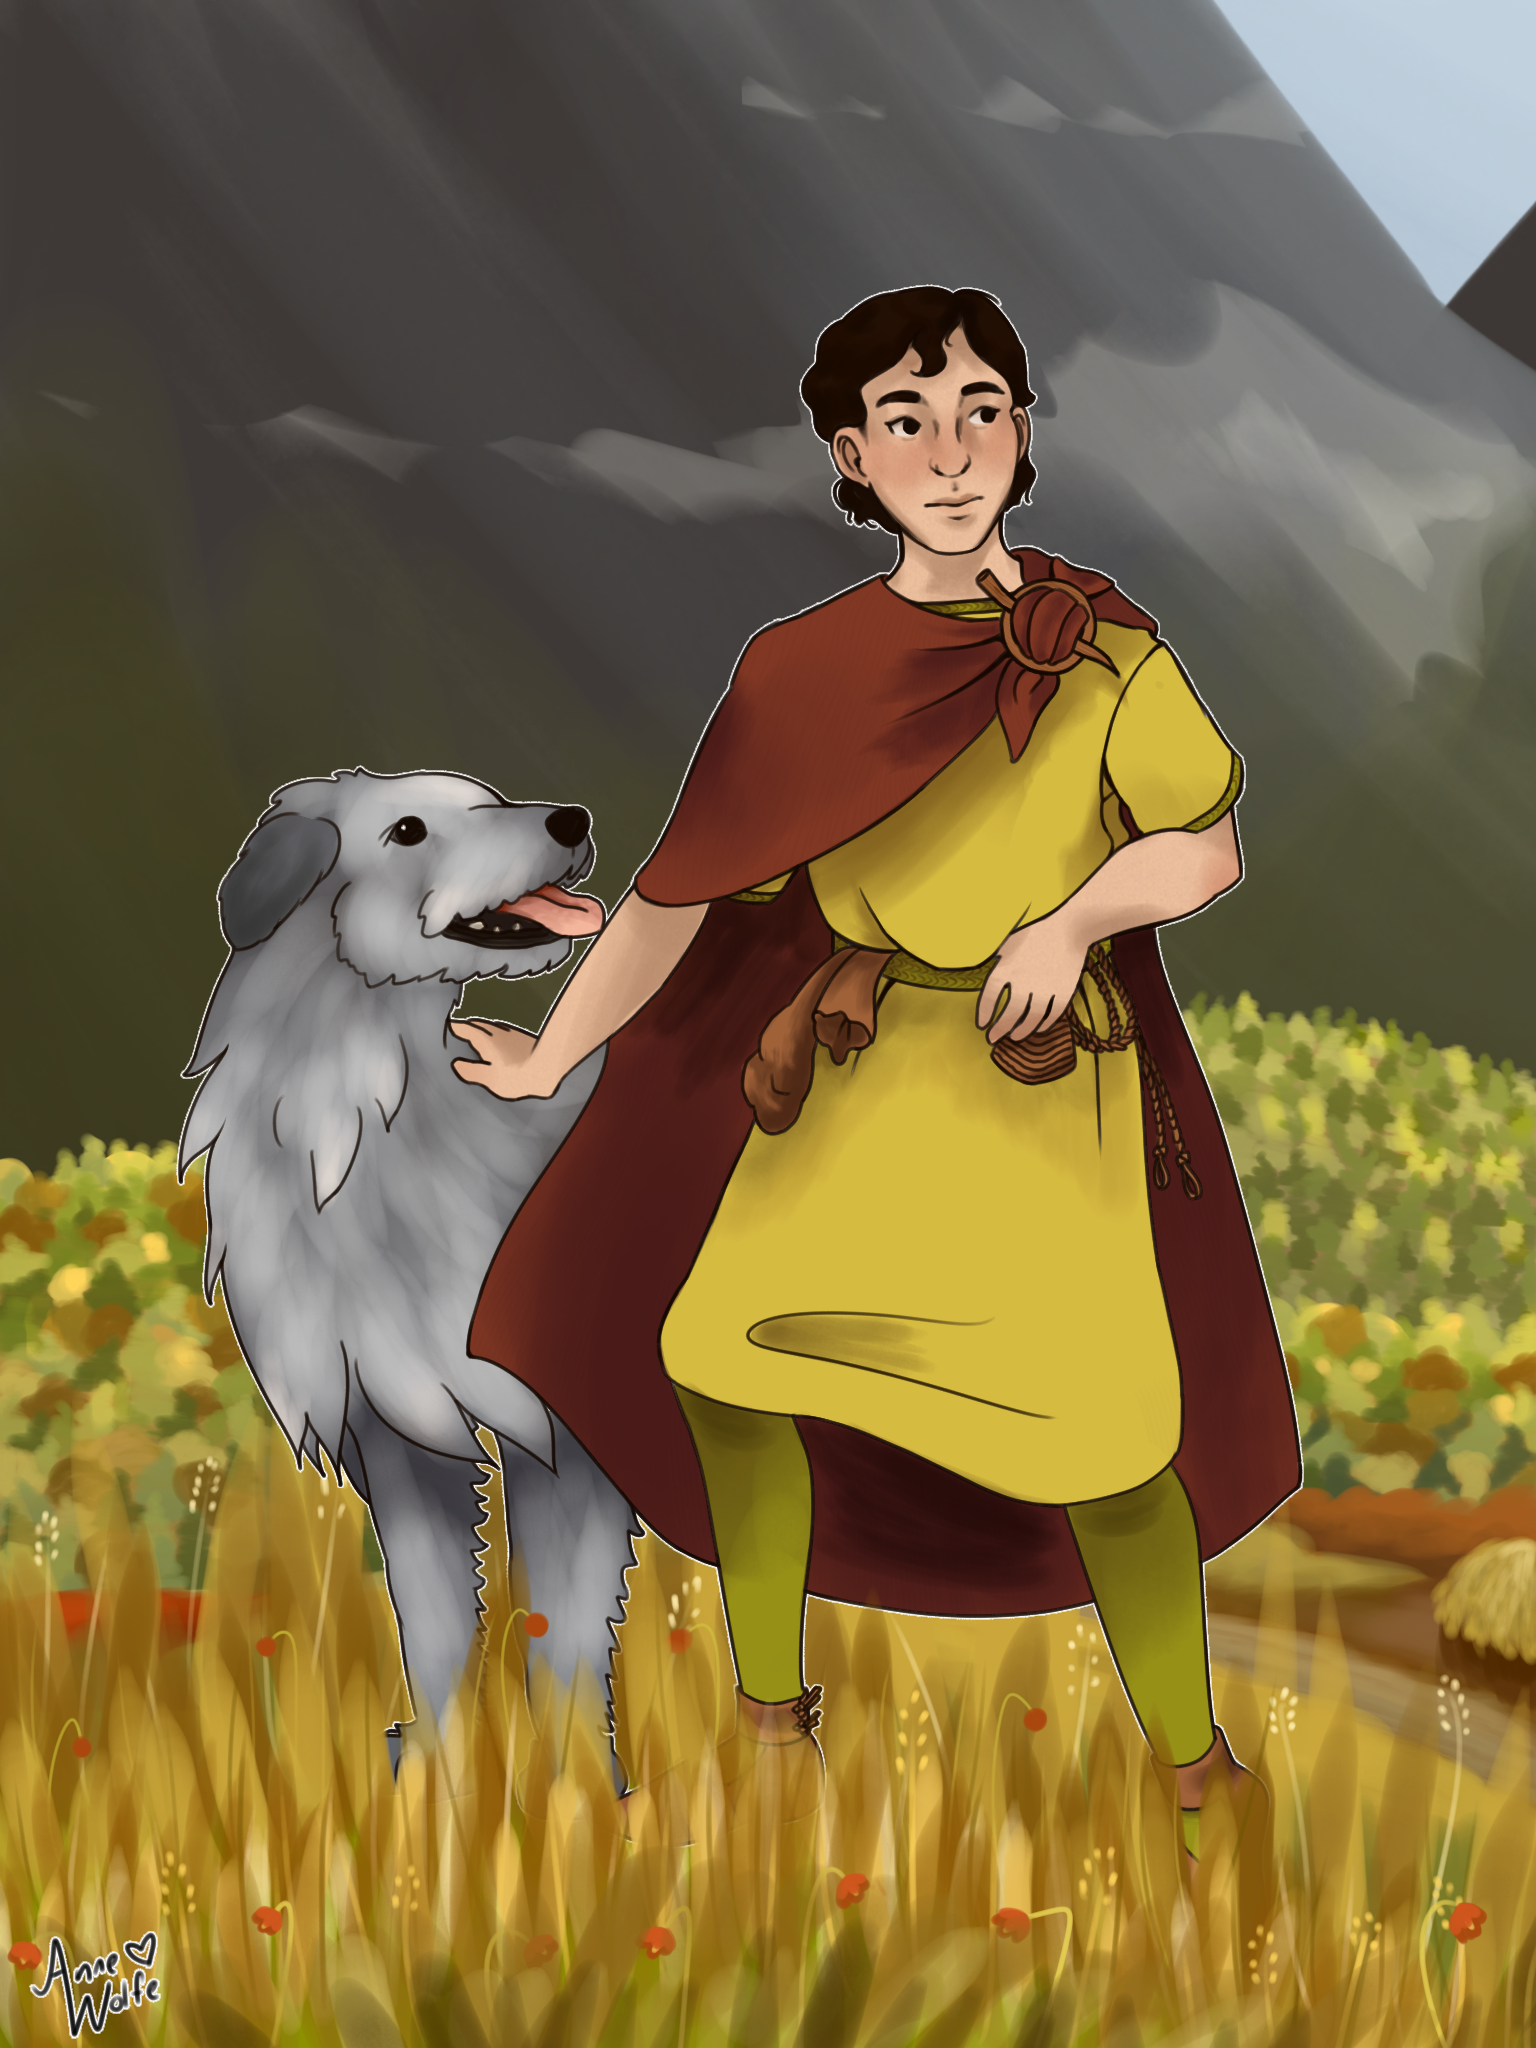 An artwork of Drust, a Dunlending boy dressed in medieval-European-style clothes, and Lleucu, a light gray Irish wolfhound, walking through a field in autumn. Drust is carrying a leather sling and bag of stones. In the background, from farthest to nearest, is a mountain range blotting out most of the sky, a hill covered in coniferous trees, a hill covered in both coniferous and deciduous trees, a hill covered in crop fields with a small cabin, and a hill covered in grasses and red flowers.